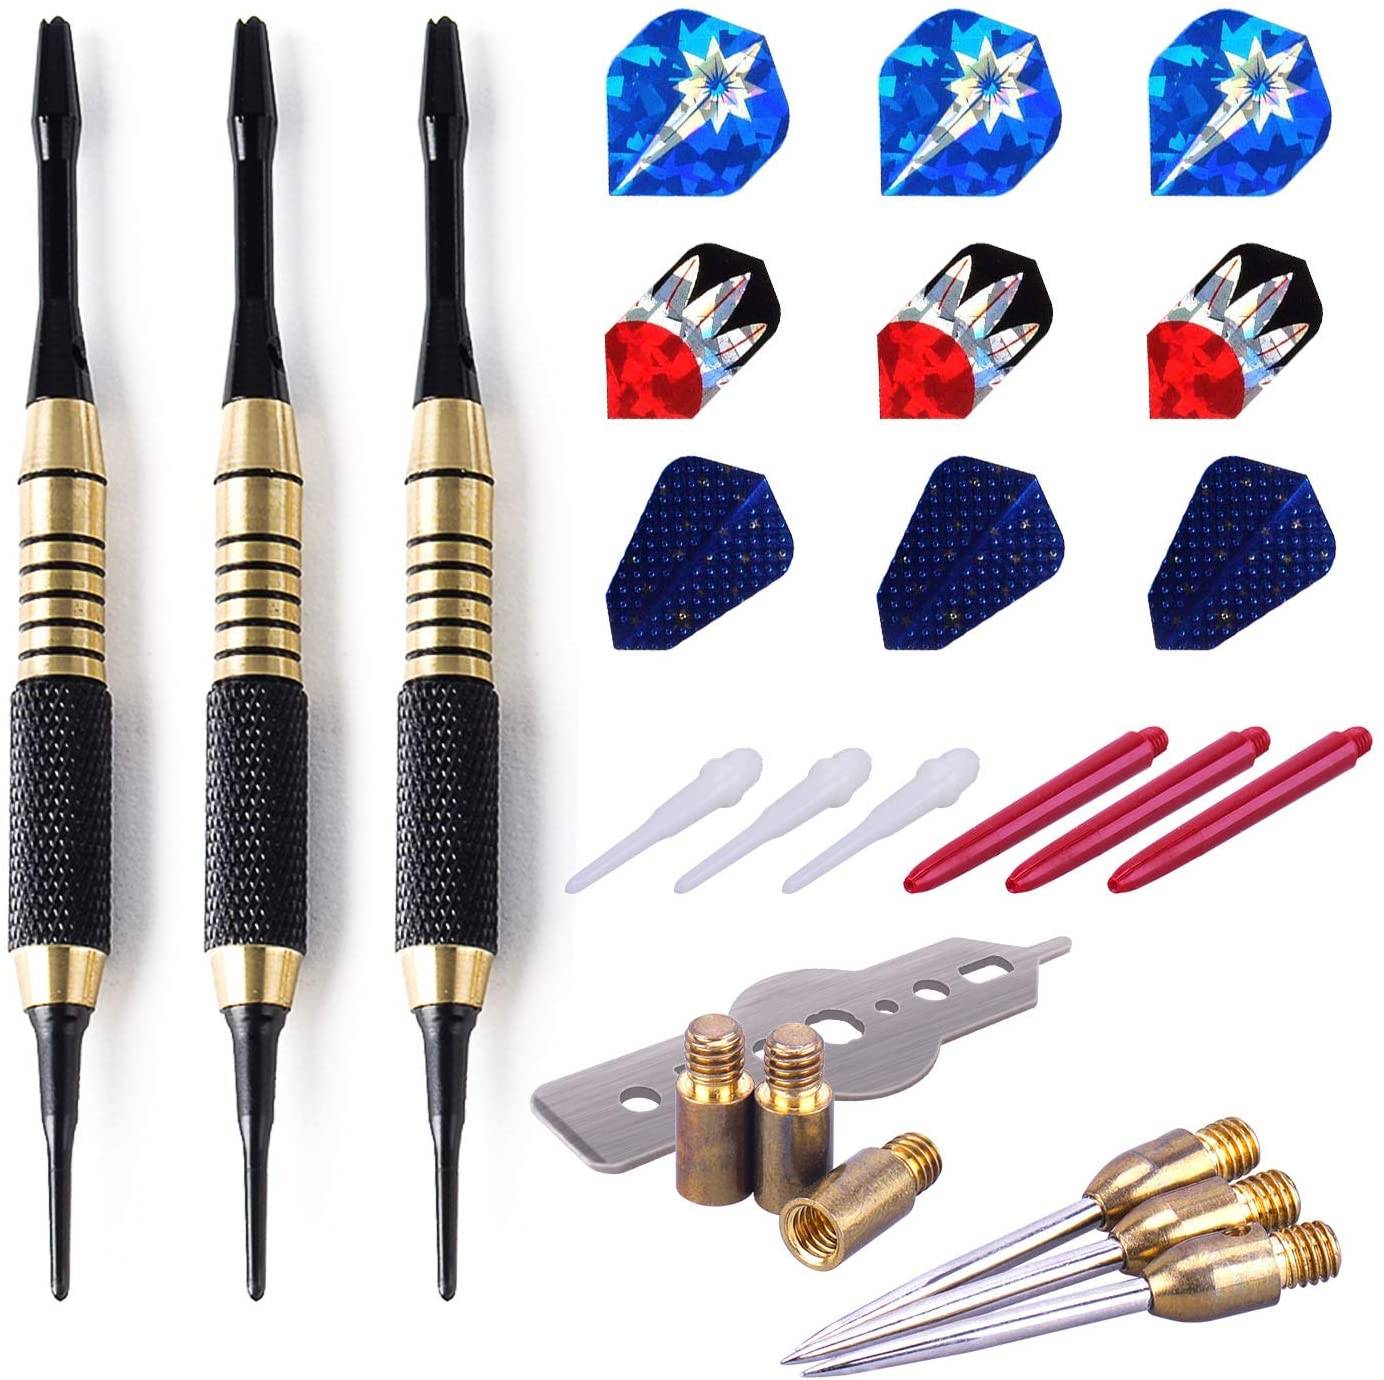 https://www.winmaxdartgame.com/soft-tip-darts-with-plastic-tips-dart-set-complete-set-3-darts-steel-tip-darts-for-professionals-win-max-product/